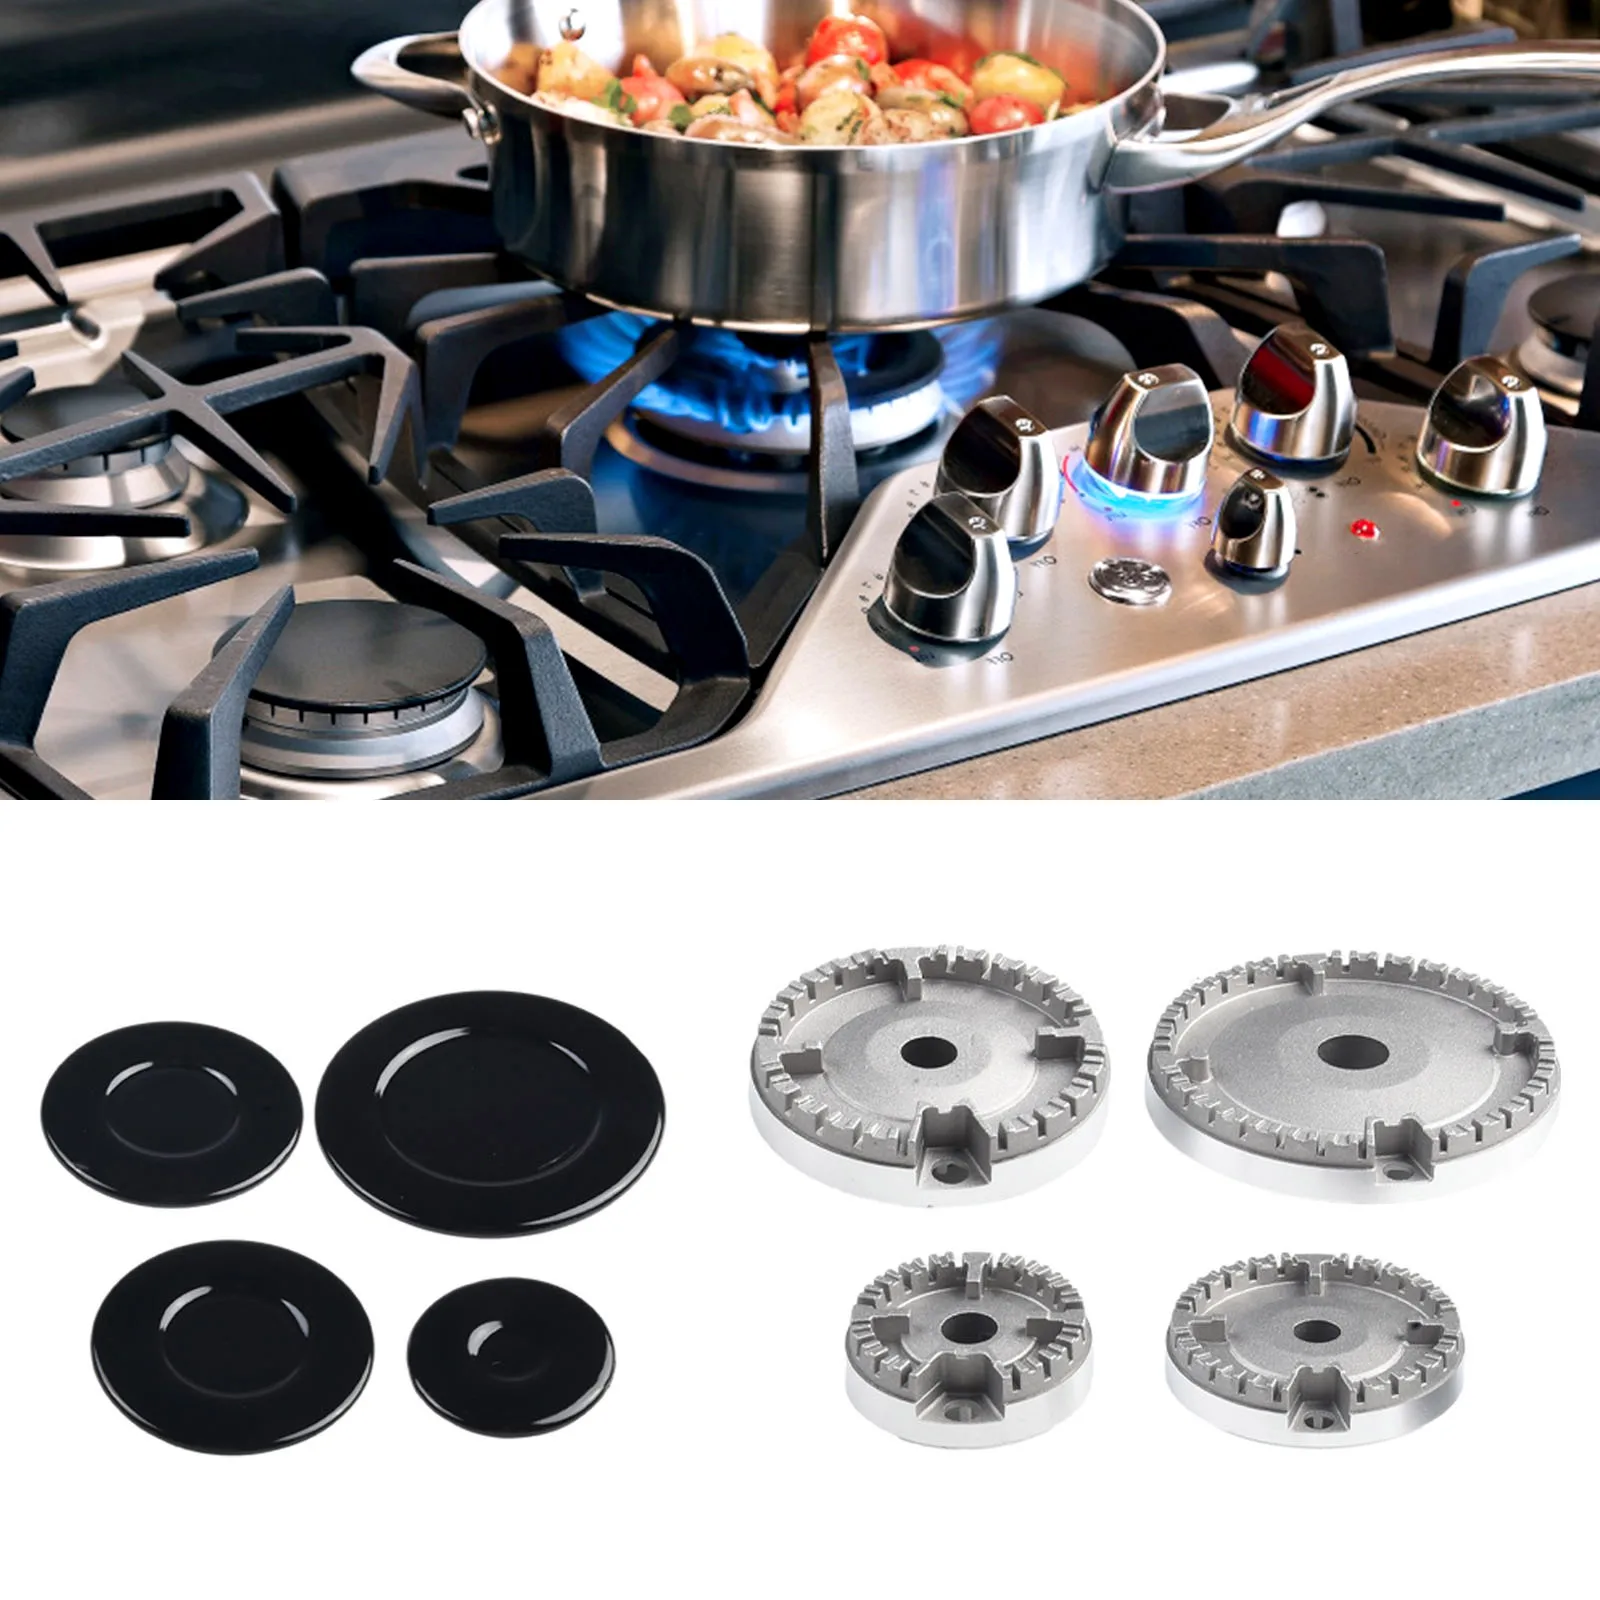 

High Quality Cooker Stove Lid Upgraded Oven Gas Hob Burner Crown Flame Cap Fits Most Gas Stove Burners Replacement Accessories